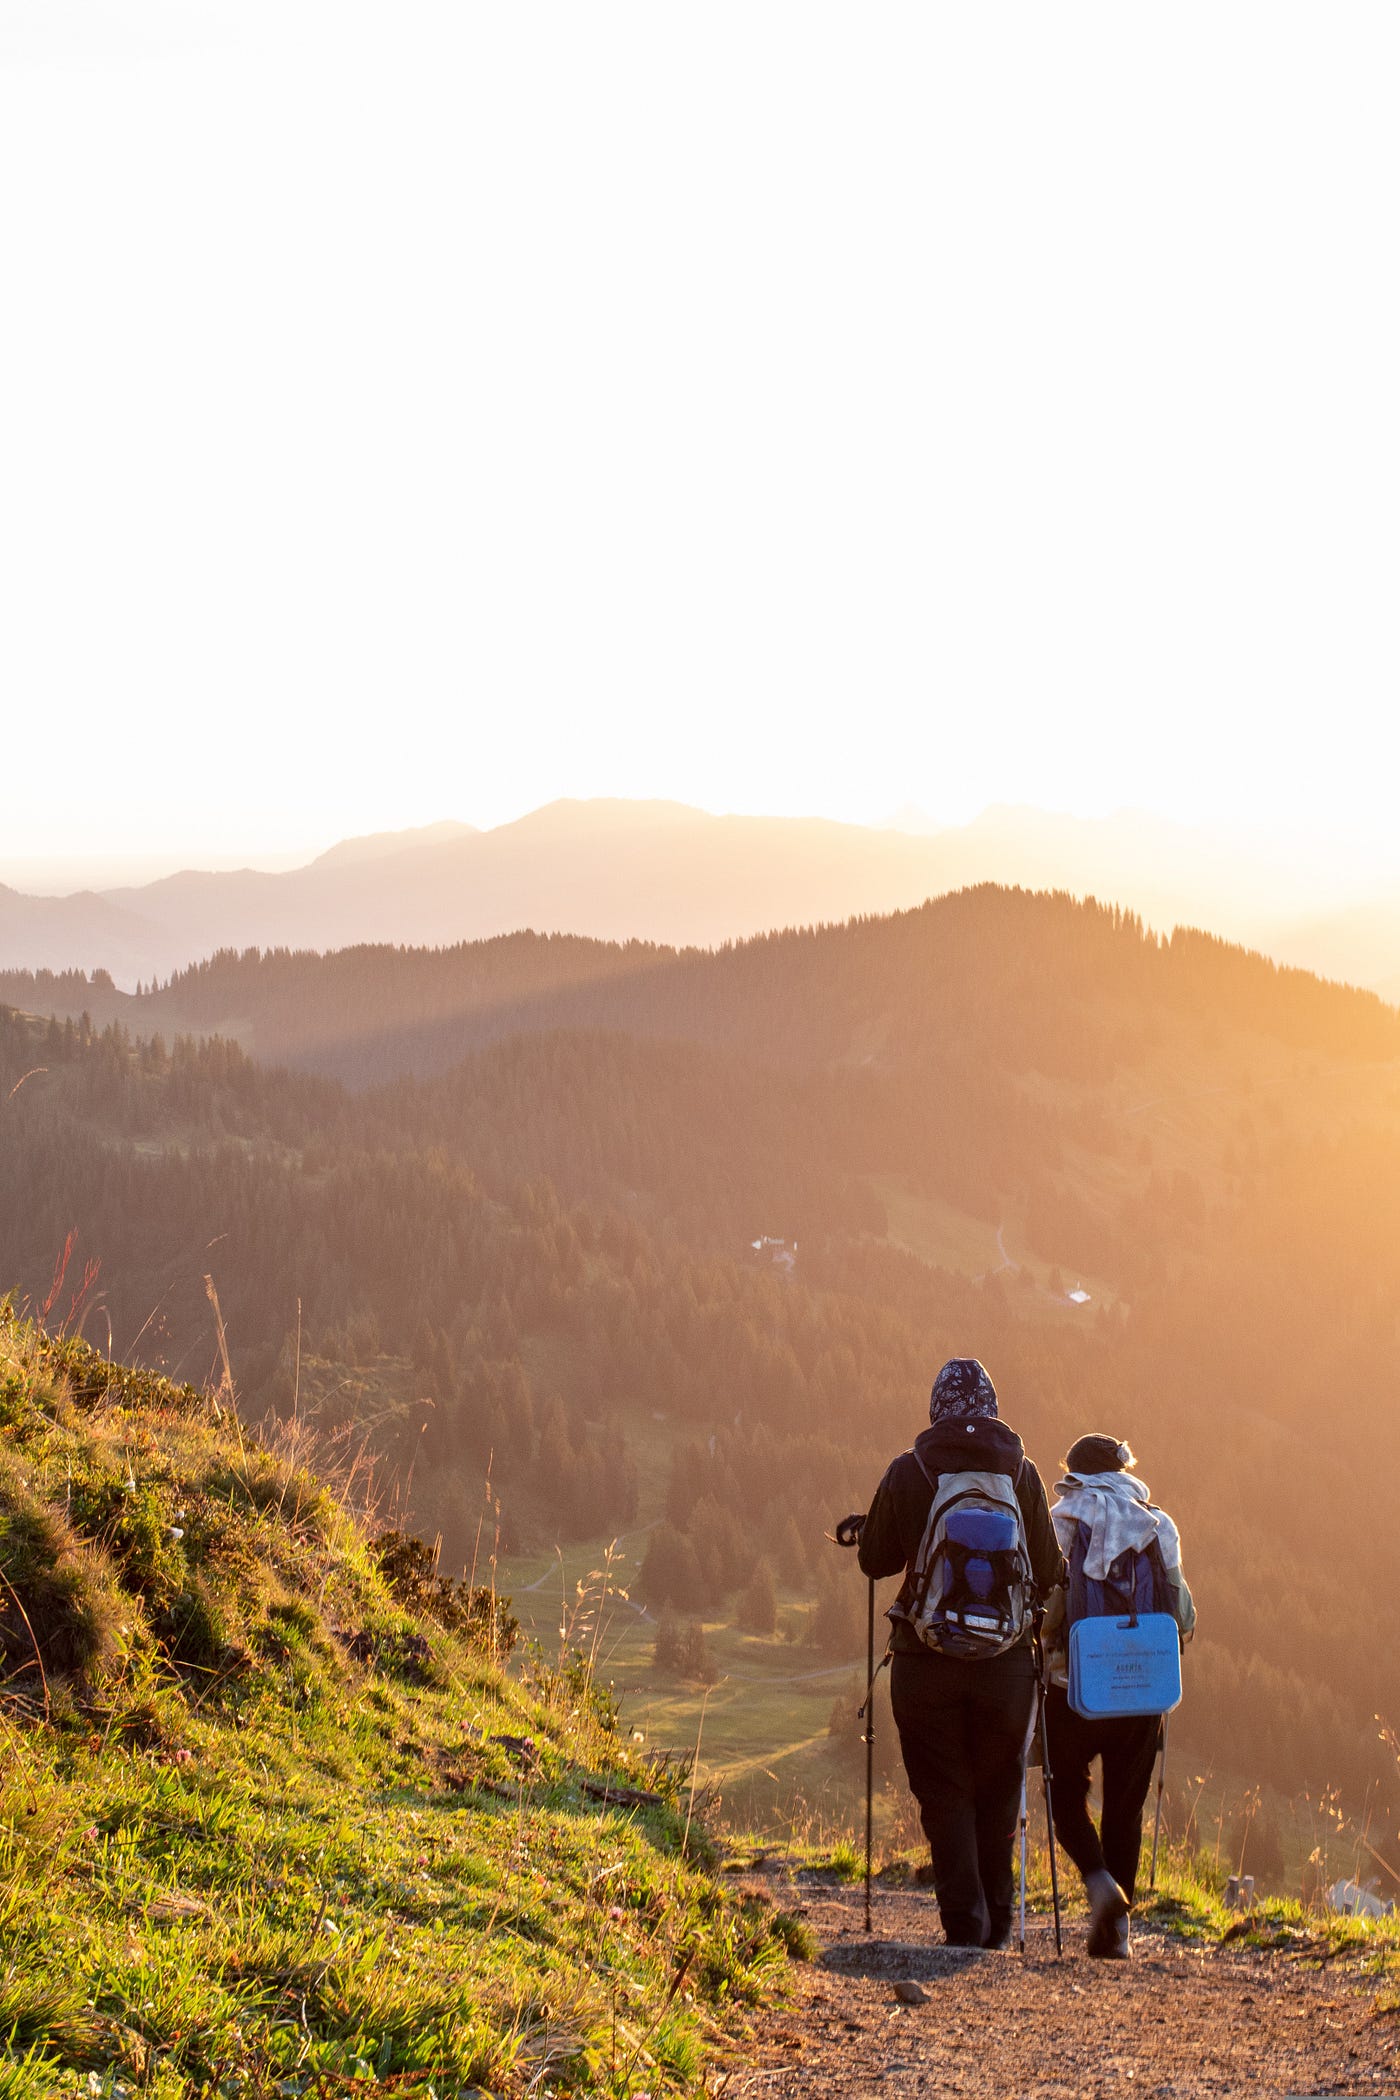 Is Hiking a Sport: A Debate. Hiking is a popular outdoor activity